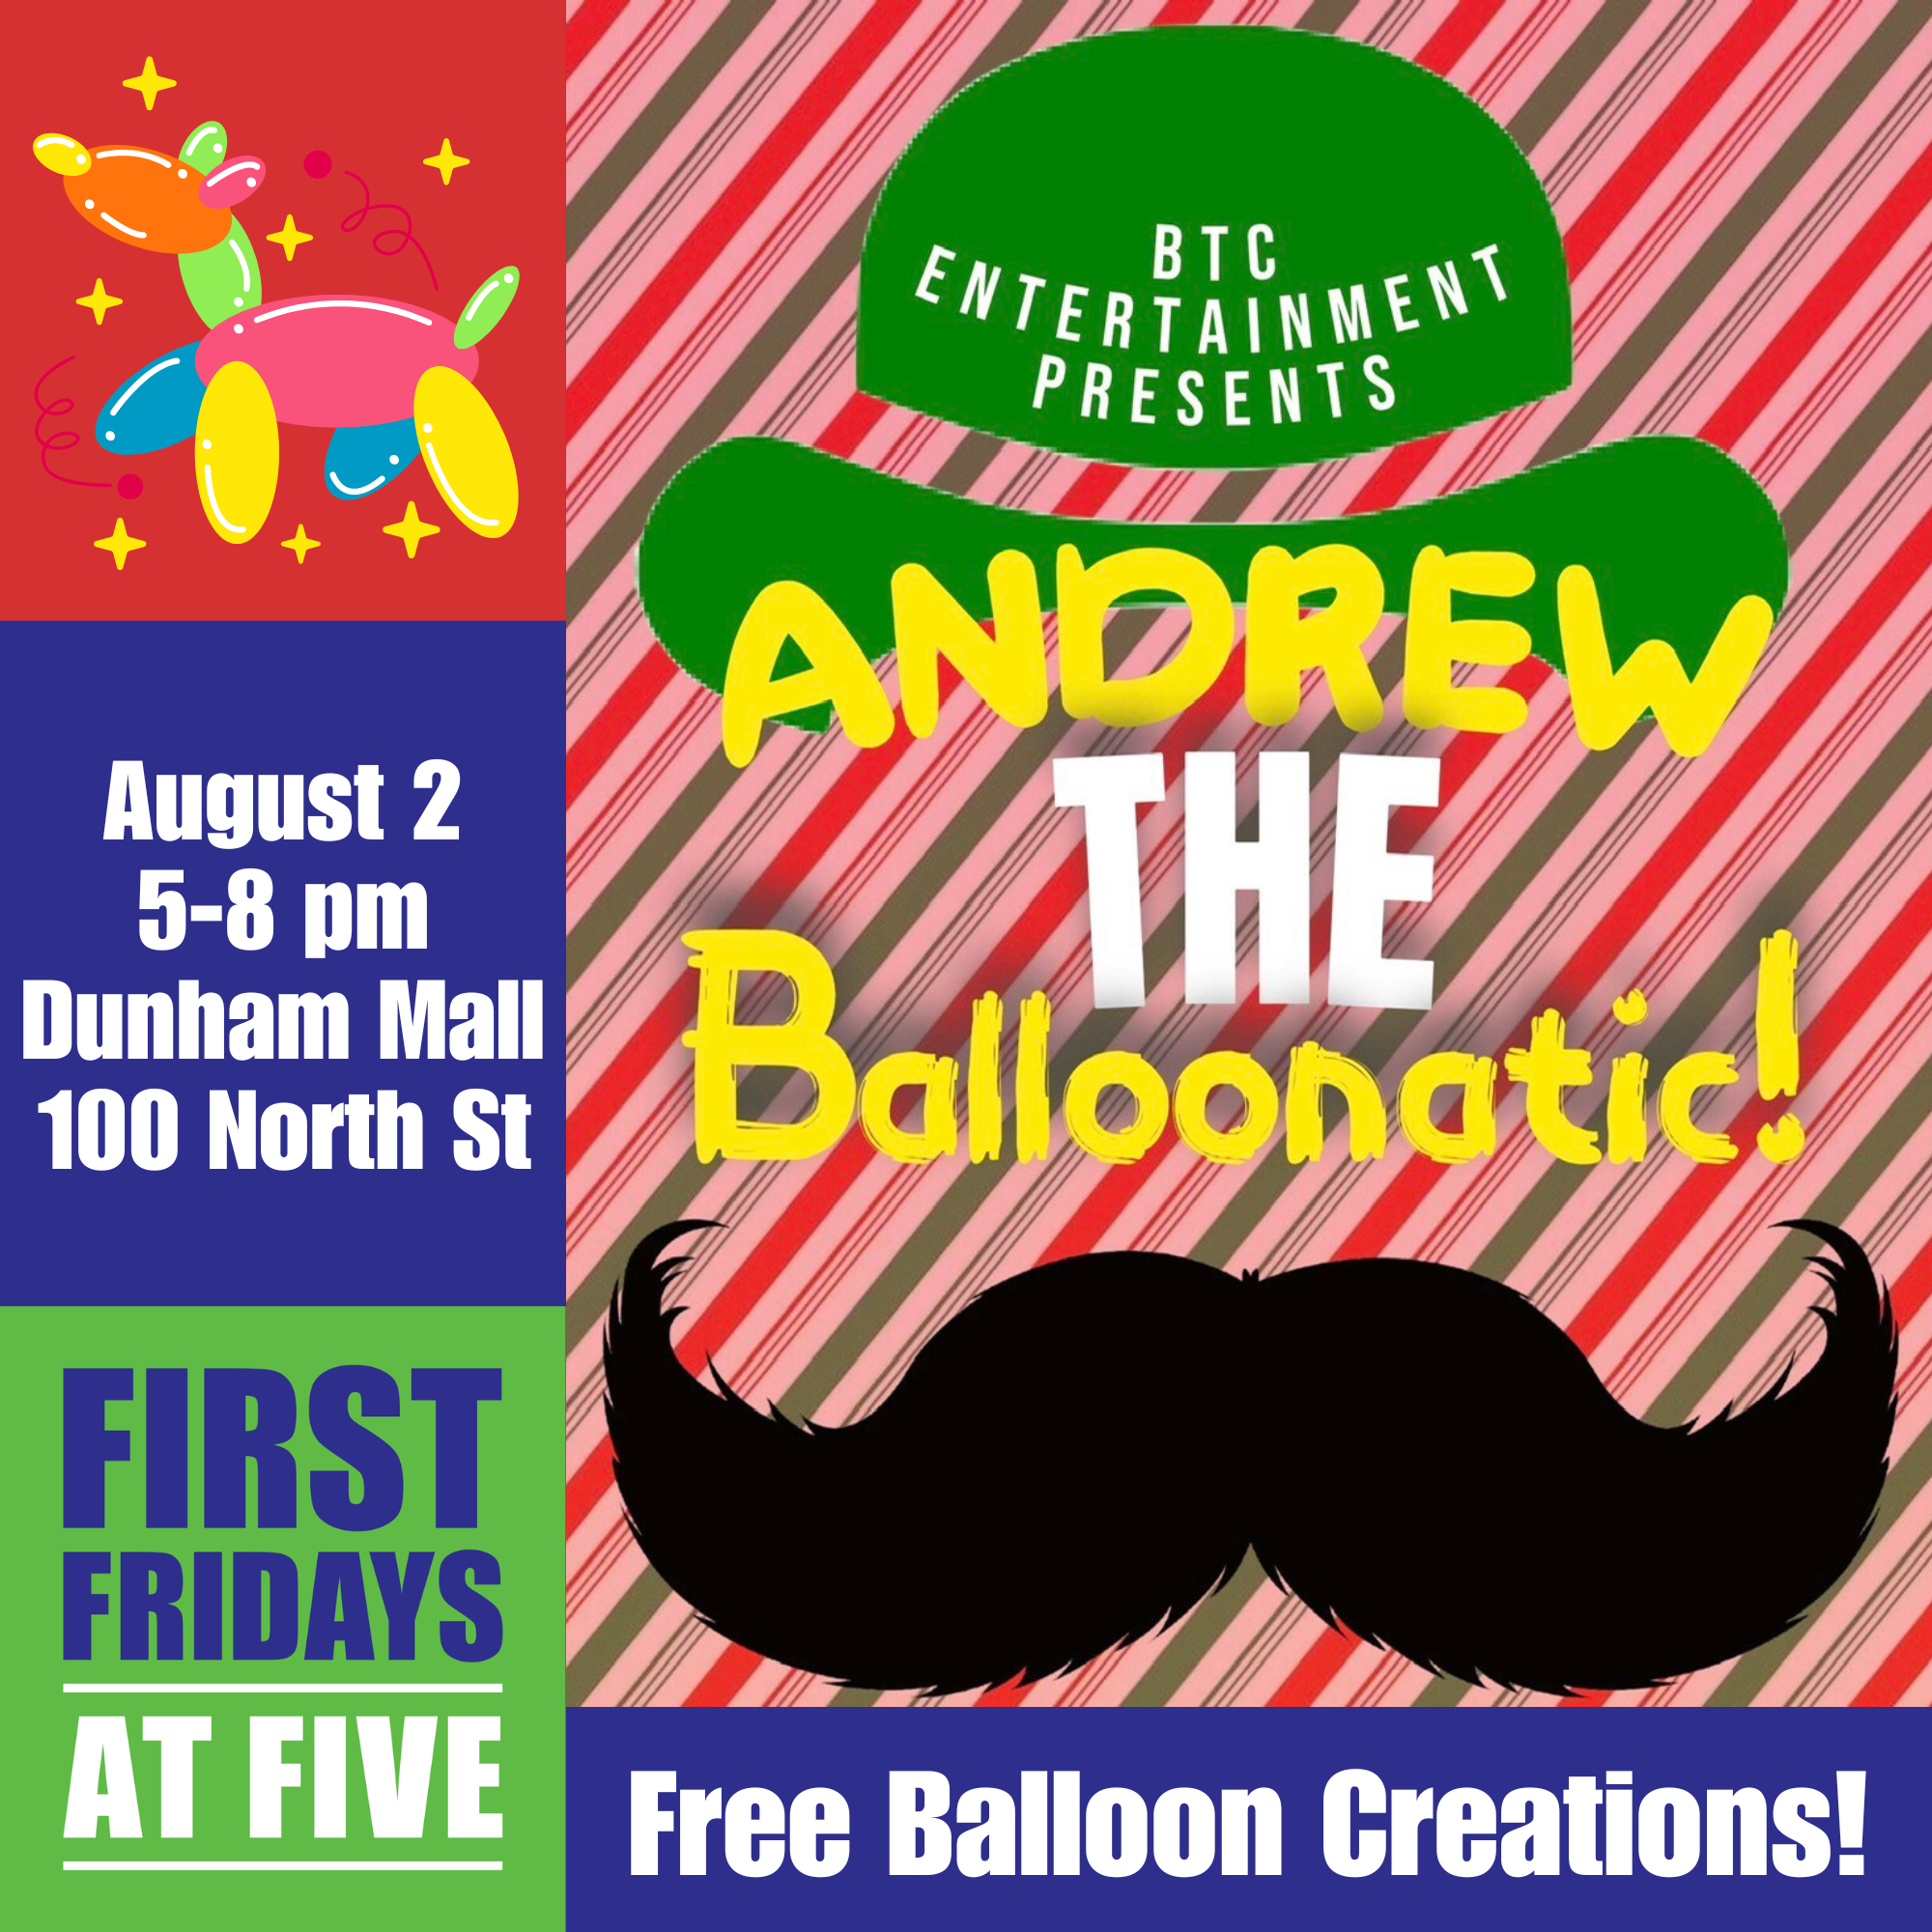 “Andrew The Balloonatic” at First Fridays at Five